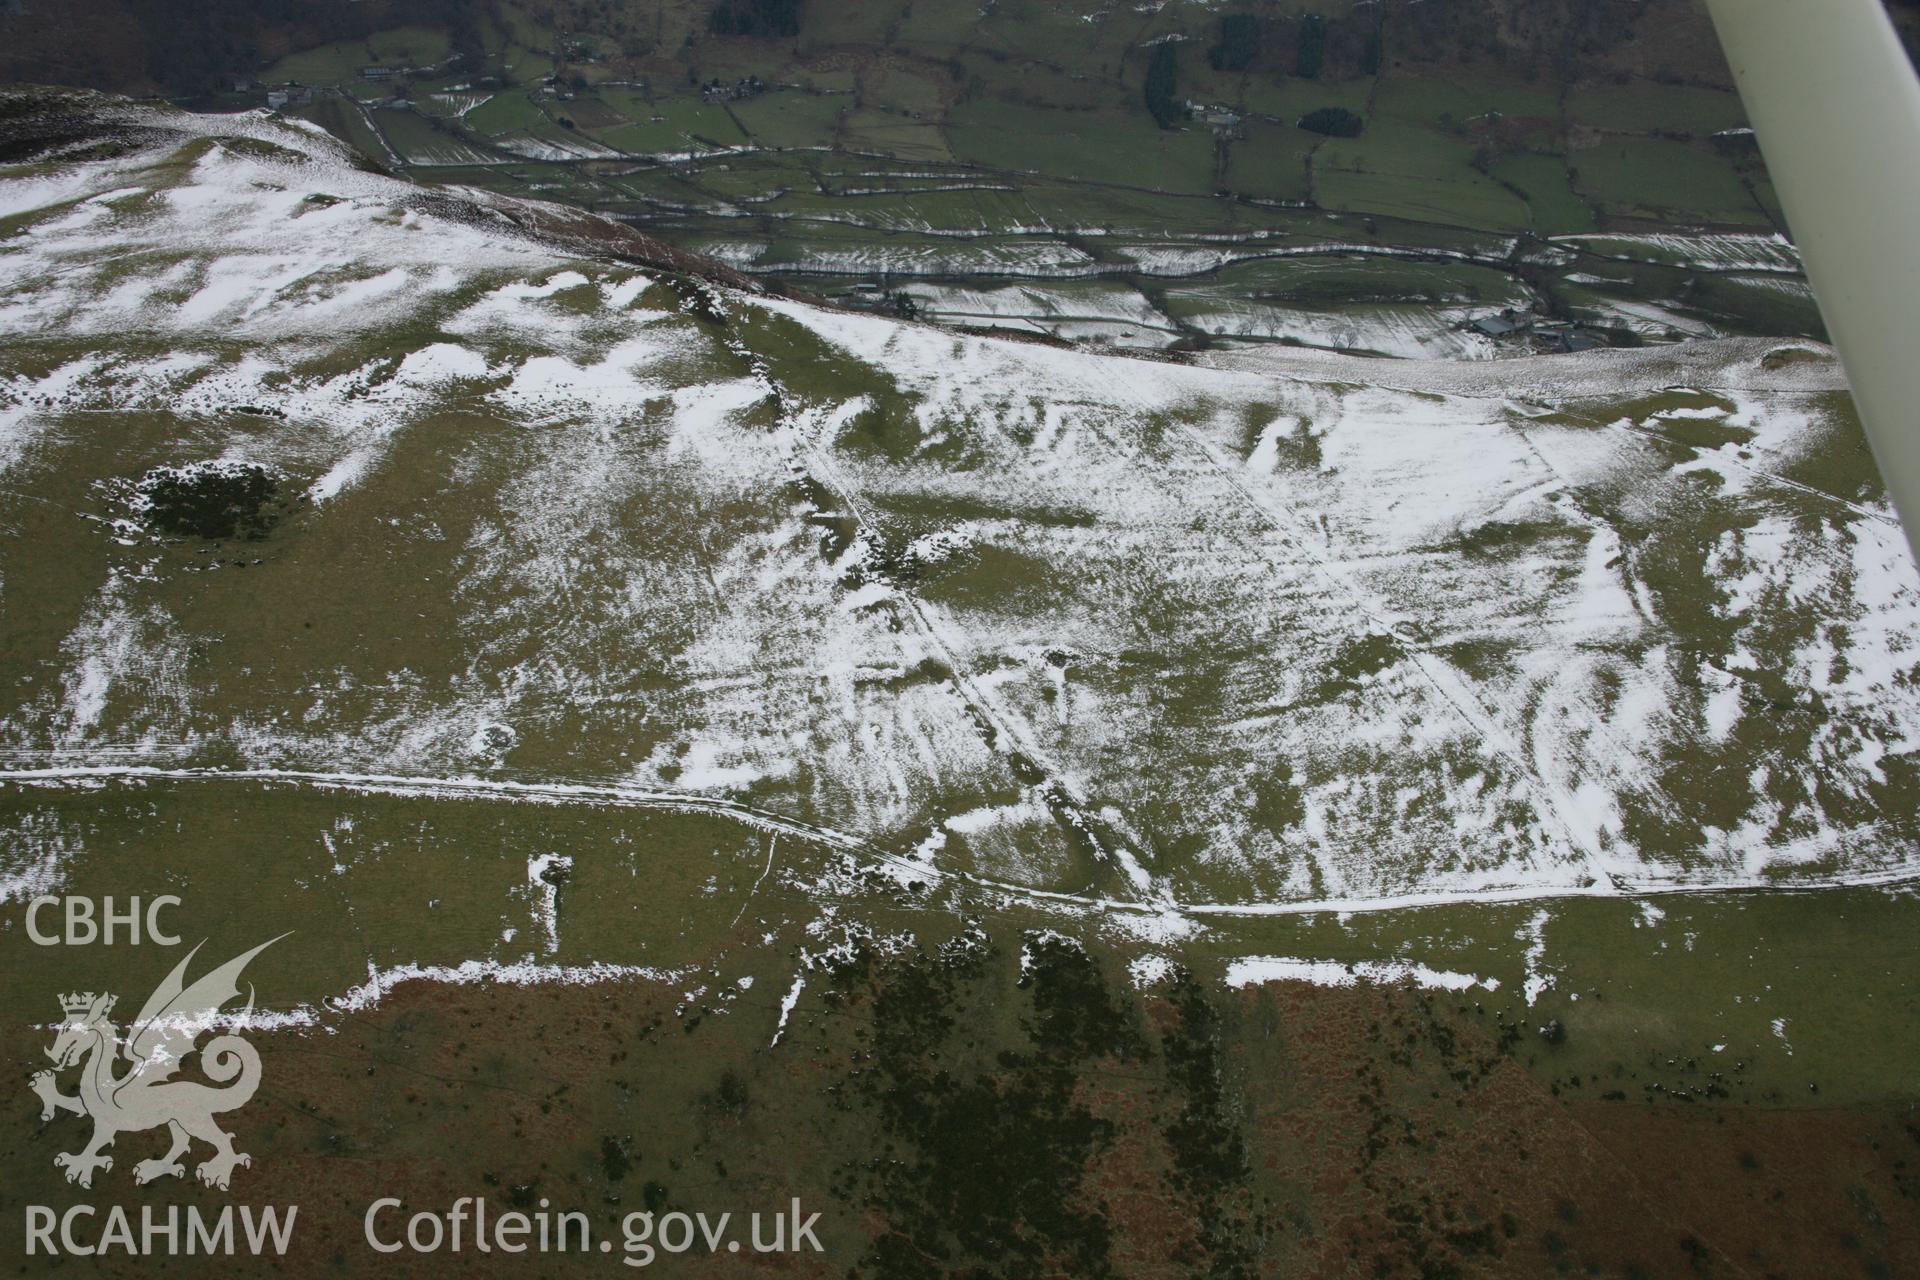 RCAHMW colour oblique aerial photograph of various undated earthworks under snow, viewed from the from the north, Garreg Fawr. Taken on 06 March 2006 by Toby Driver